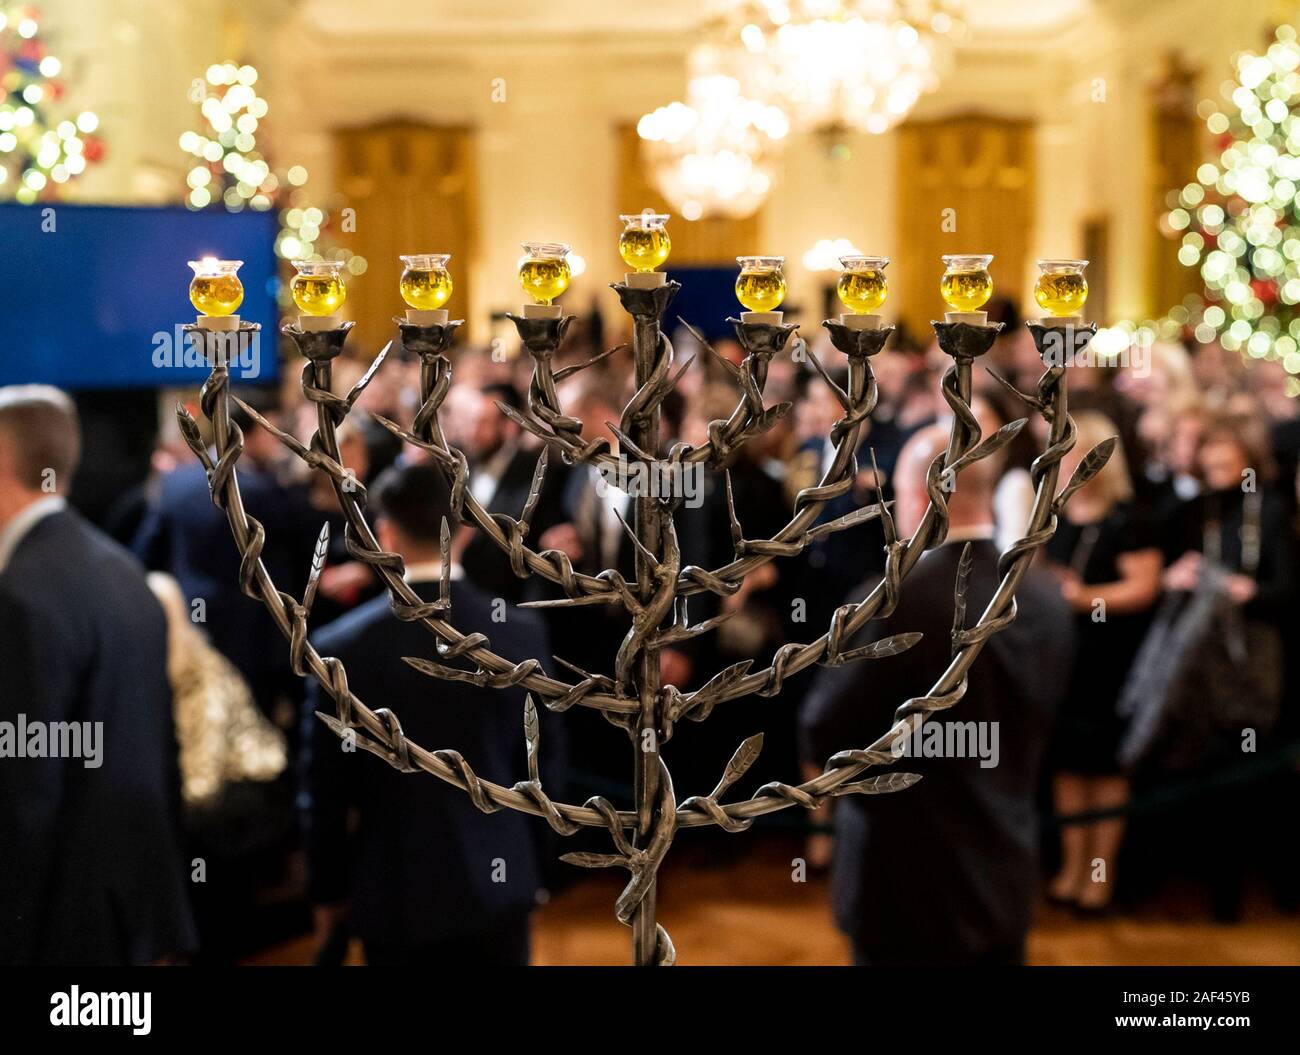 Washington, United States of America. 11 December, 2019. A light on the Menorah burns following the lighting ceremony with U.S President Donald Trump and First Lady Melania Trump during an evening Hanukkah Reception in the East Room of the White House December 11, 2019 in Washington, DC.  Credit: Joyce Boghosian/White House Photo/Alamy Live News Stock Photo